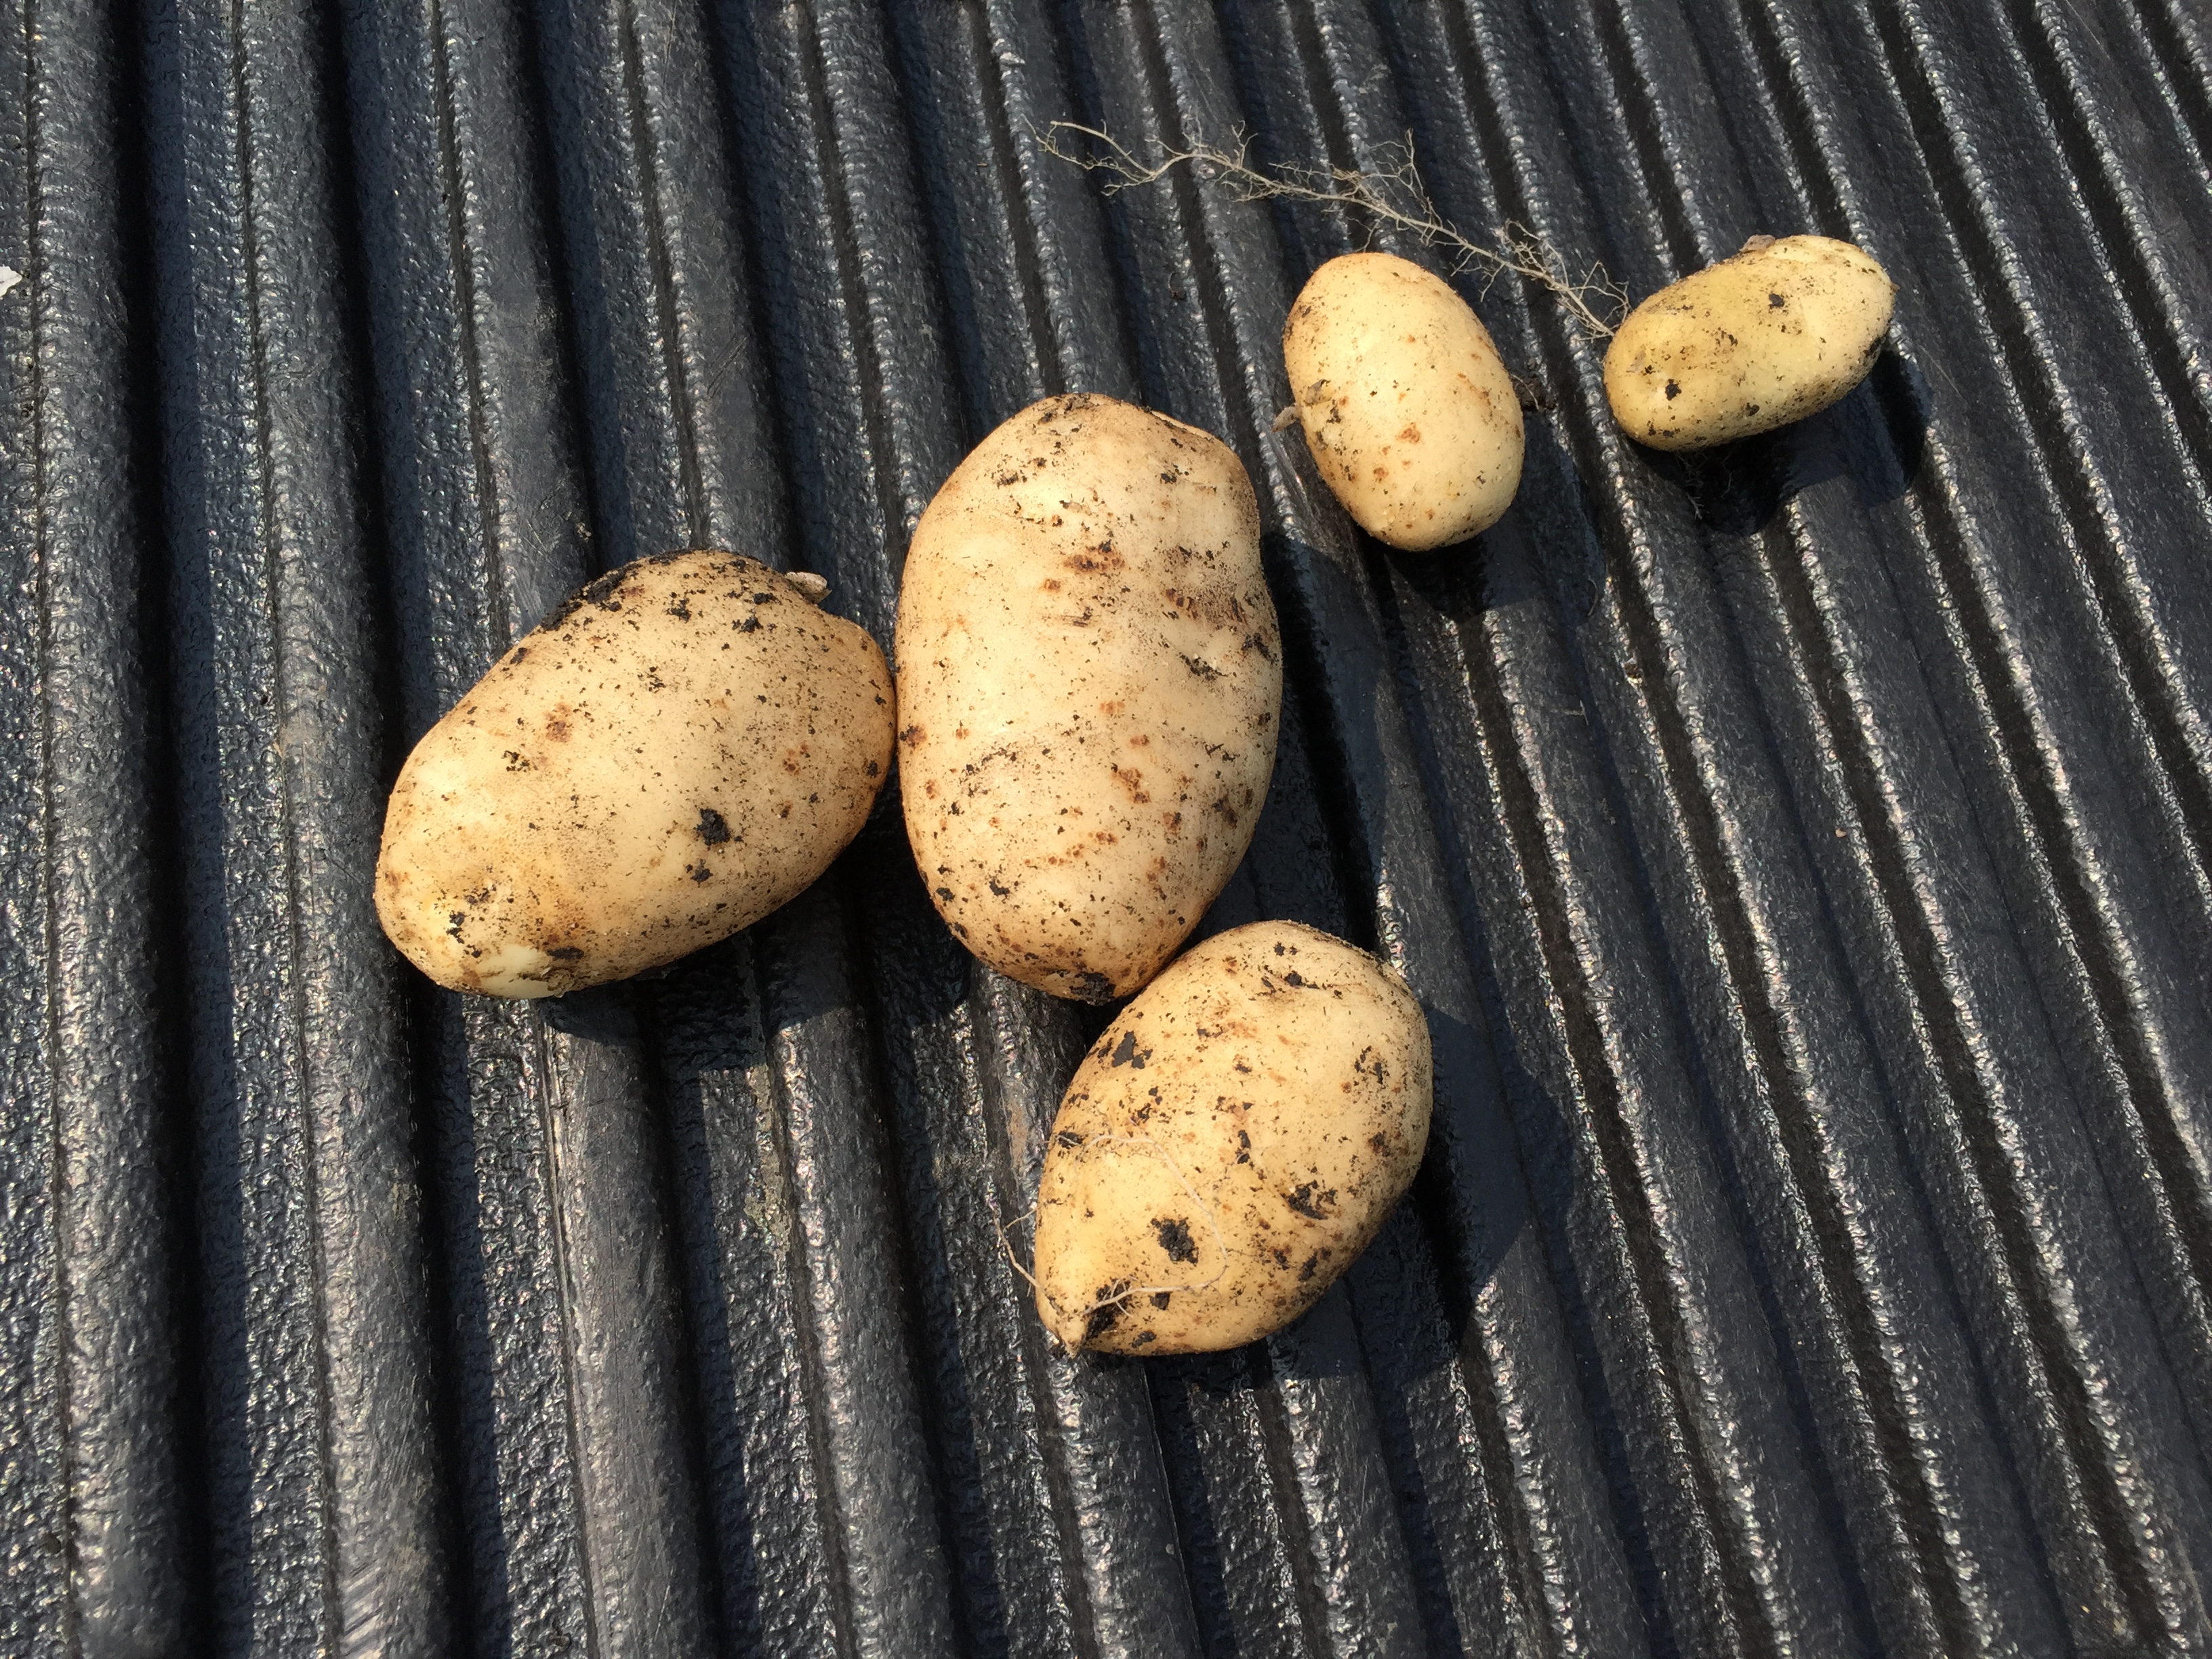  Potatoes! The larges is about the same diameter as a golf ball and about 3 inches long. 